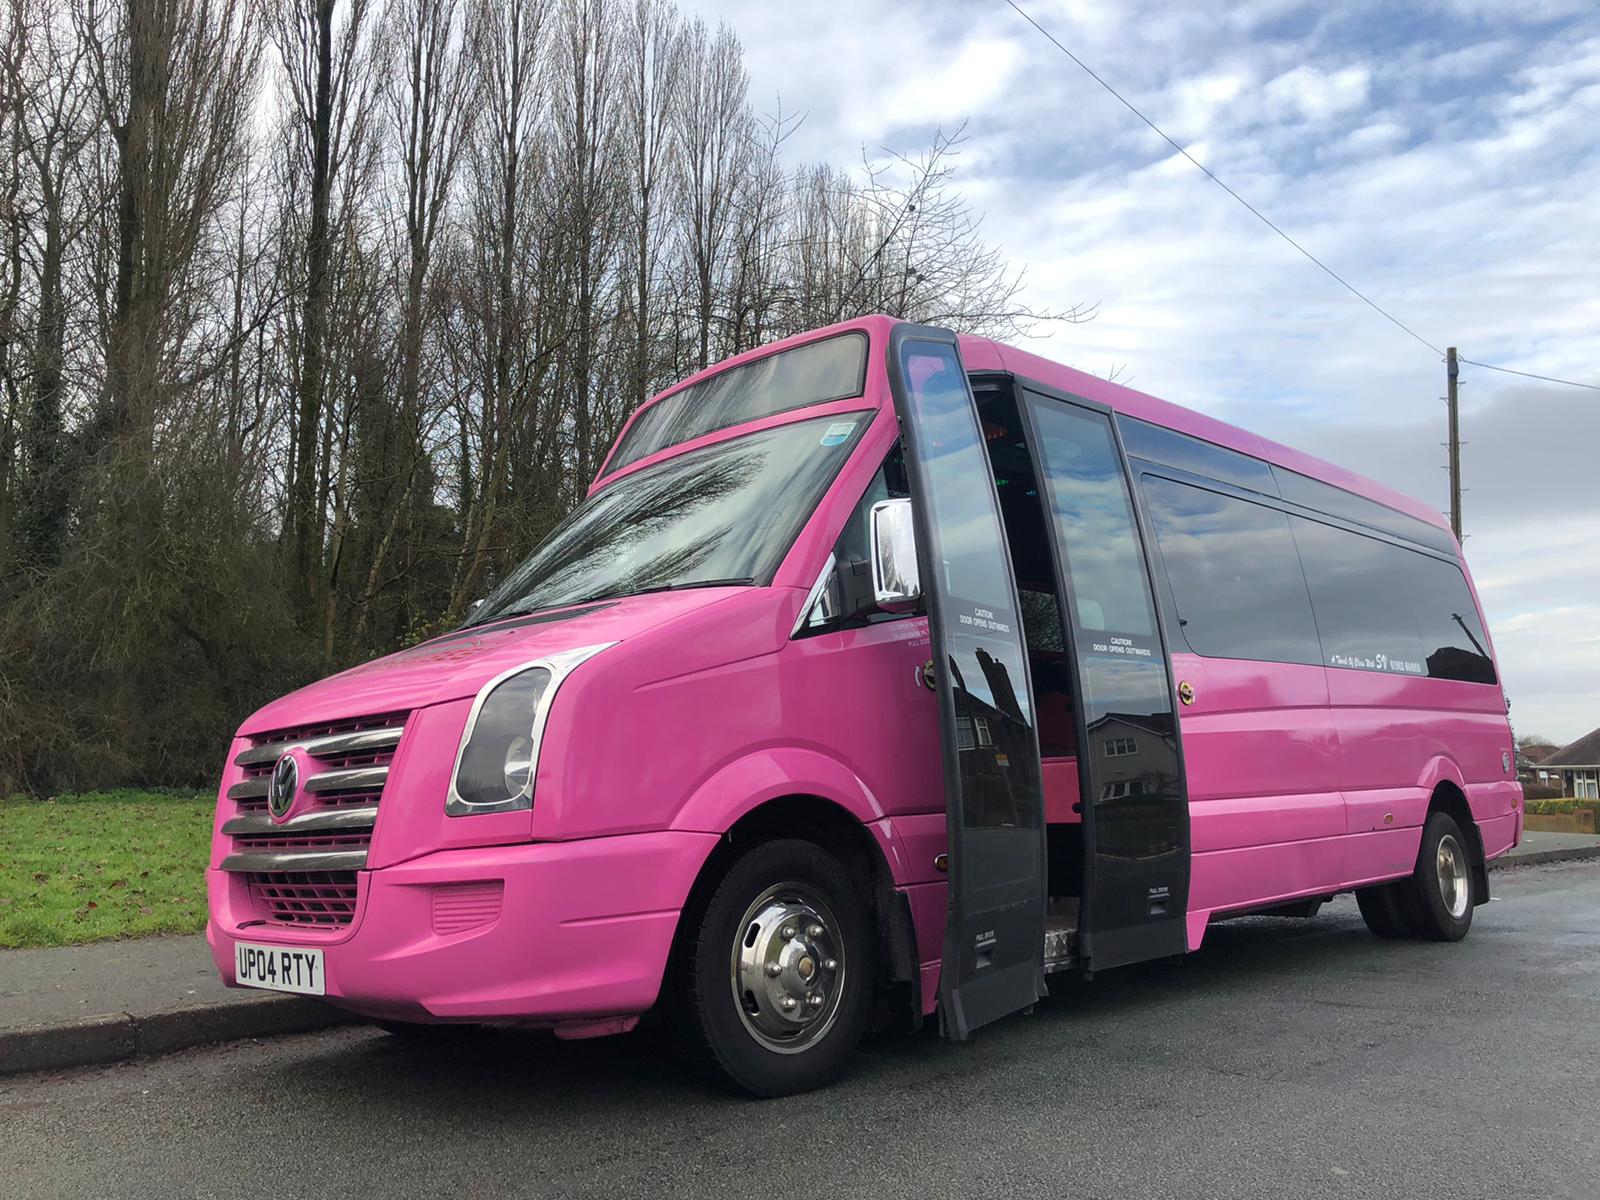 Maximising Fun on Wheels: What to Look for in a UK Party Bus Experience